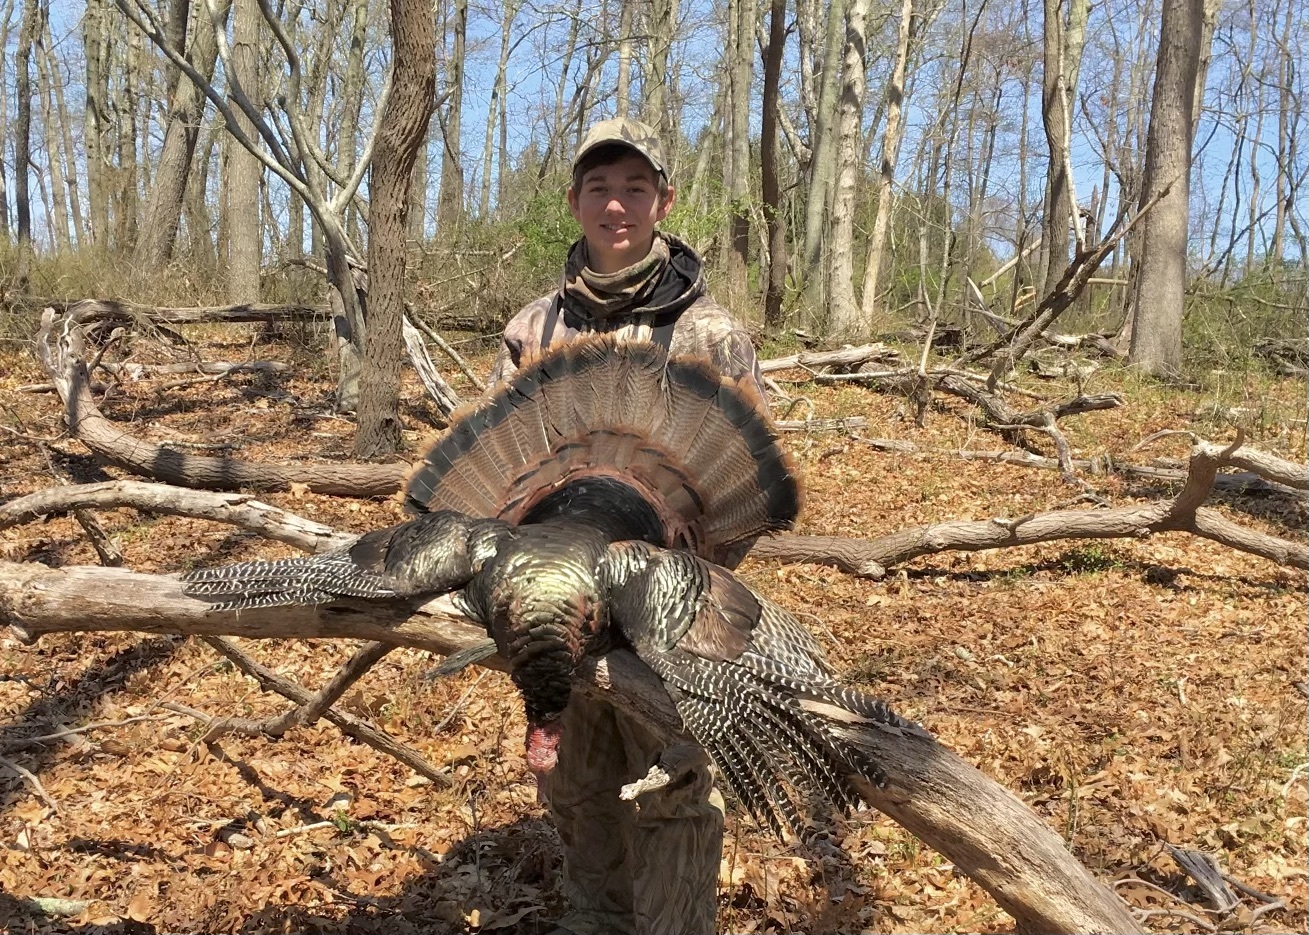 Nate Vella from Water Mill with a nice turkey harvested during spring in a youth turkey hunting event in 2020.